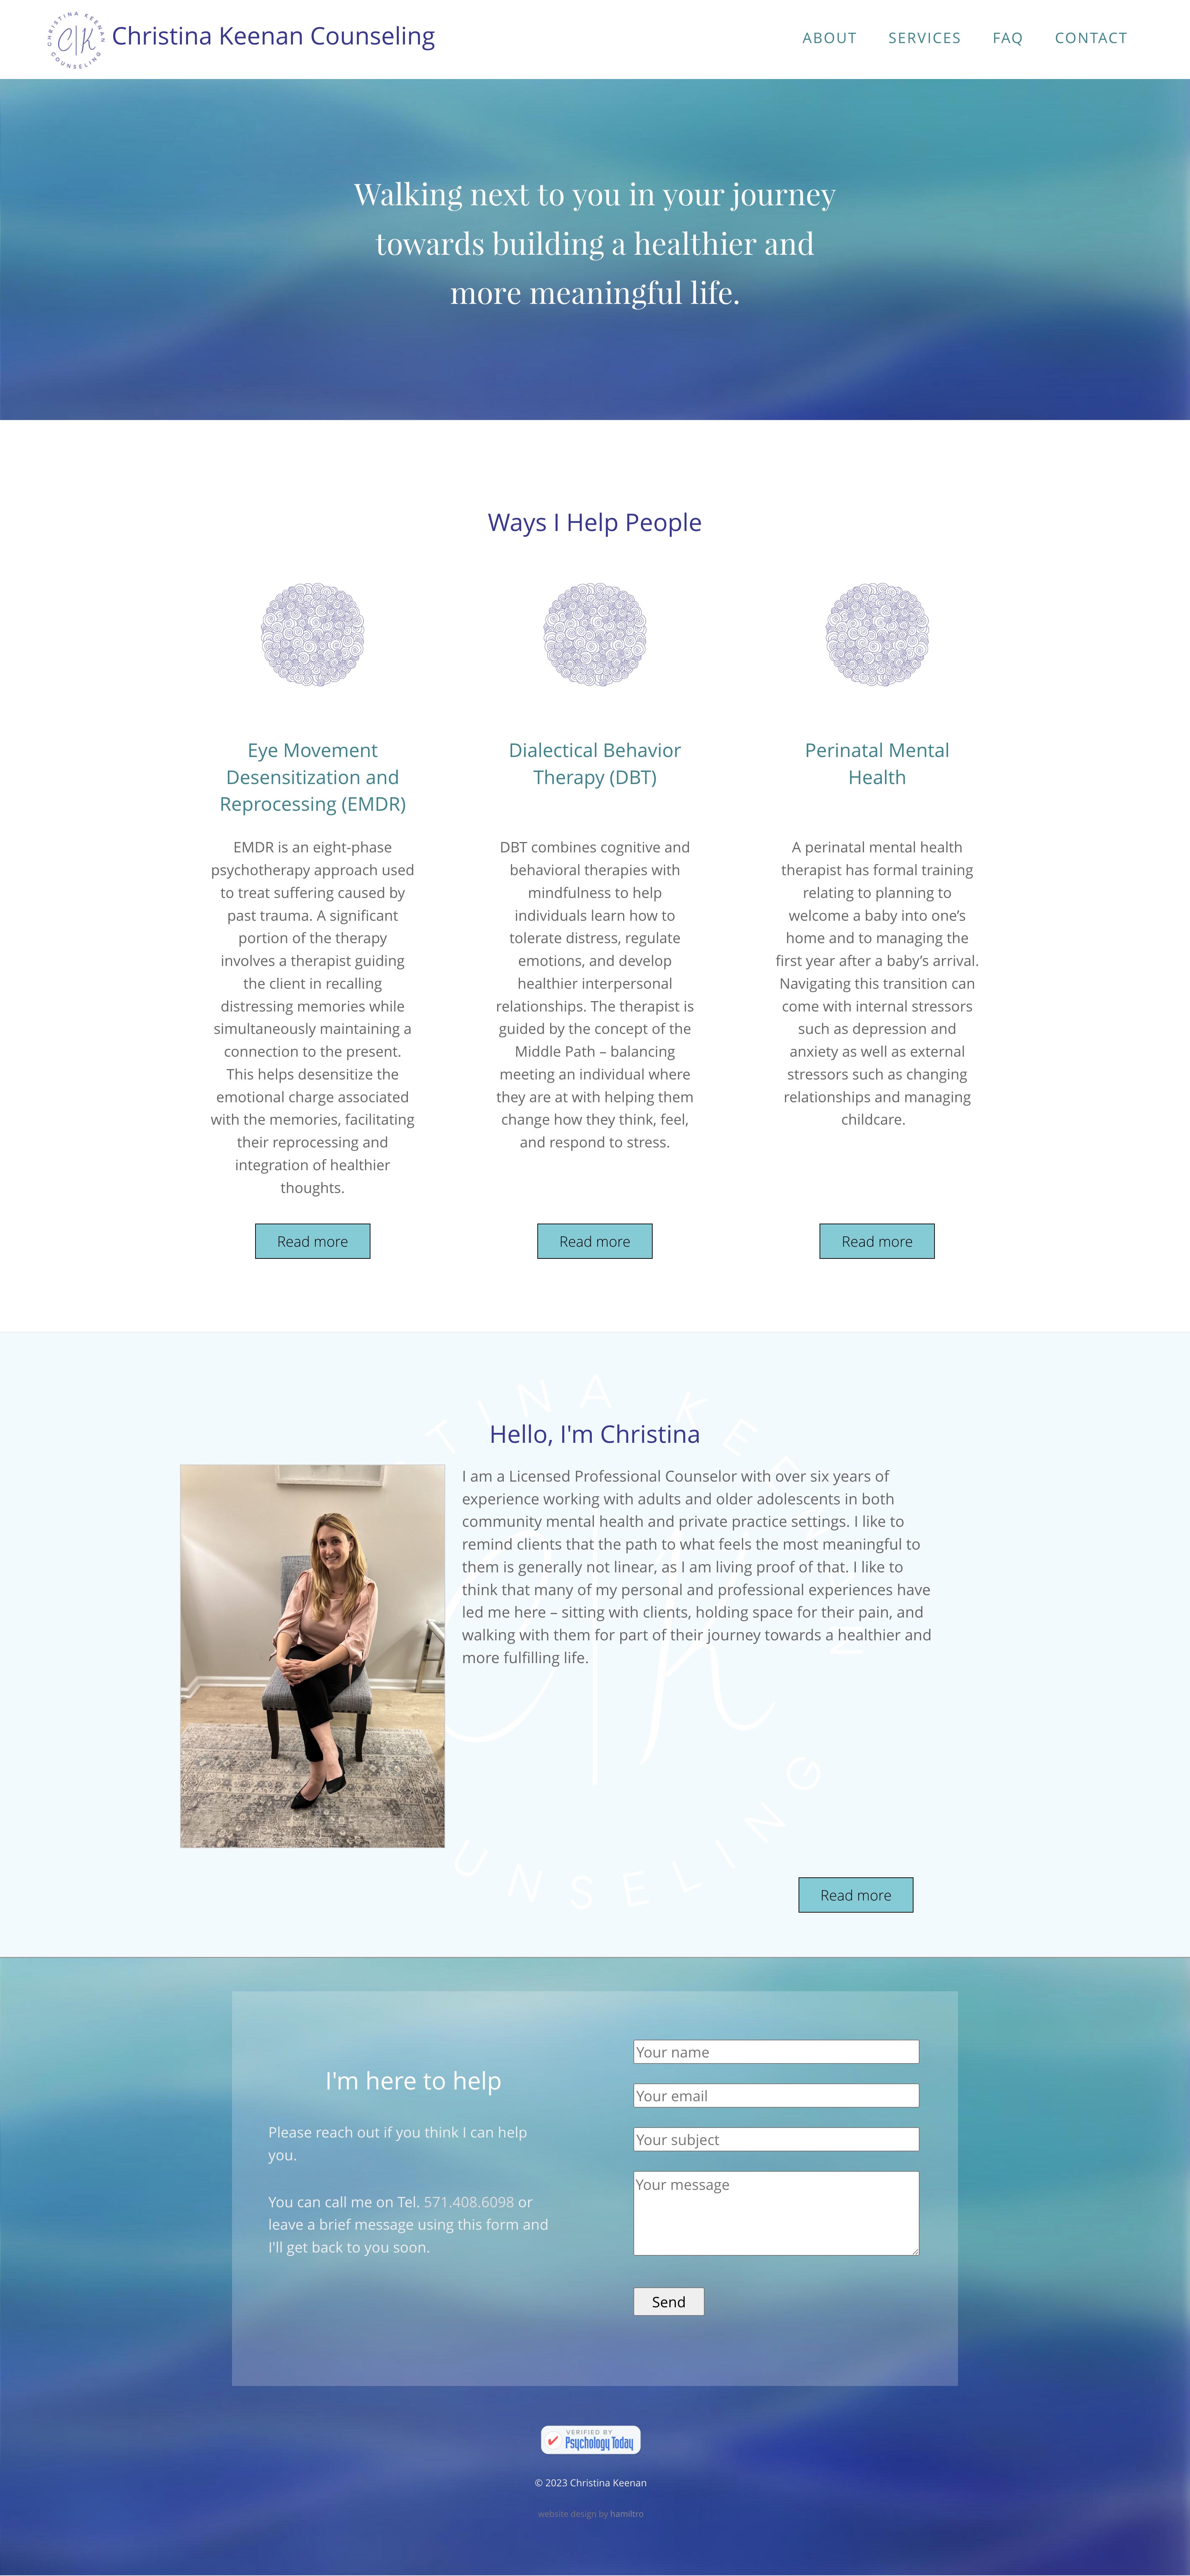 website design for therapists-coaches - Calm and informative website design for a therapeutic counselor in Virginia. Optimized to bring new clients.																																						 - long-scrolling page with rich visual sections to help a user find what they are looking for.